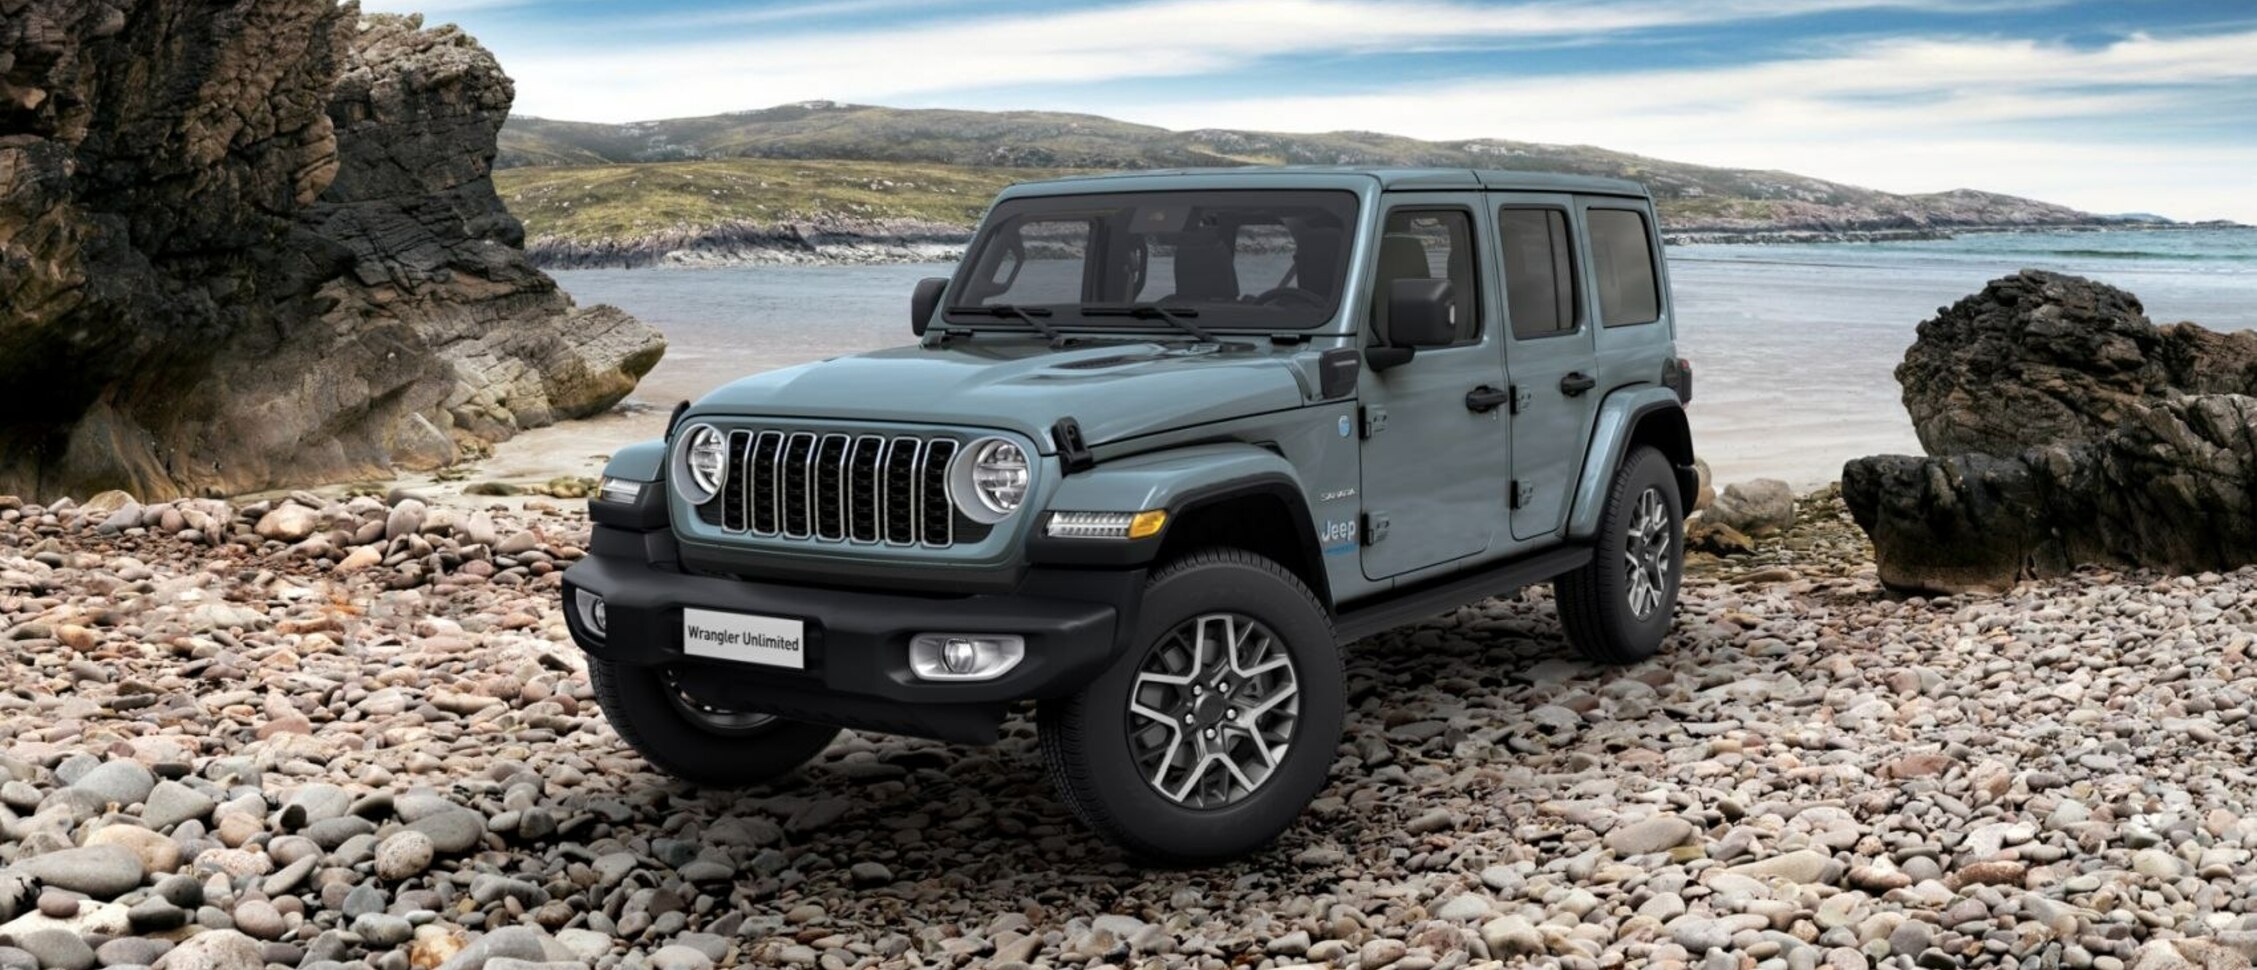 Jeep Wrangler IV Unlimited (JL, facelift 2023) Rubicon 392 6.4 V8 (481 Hp) 4WD Automatic 2023